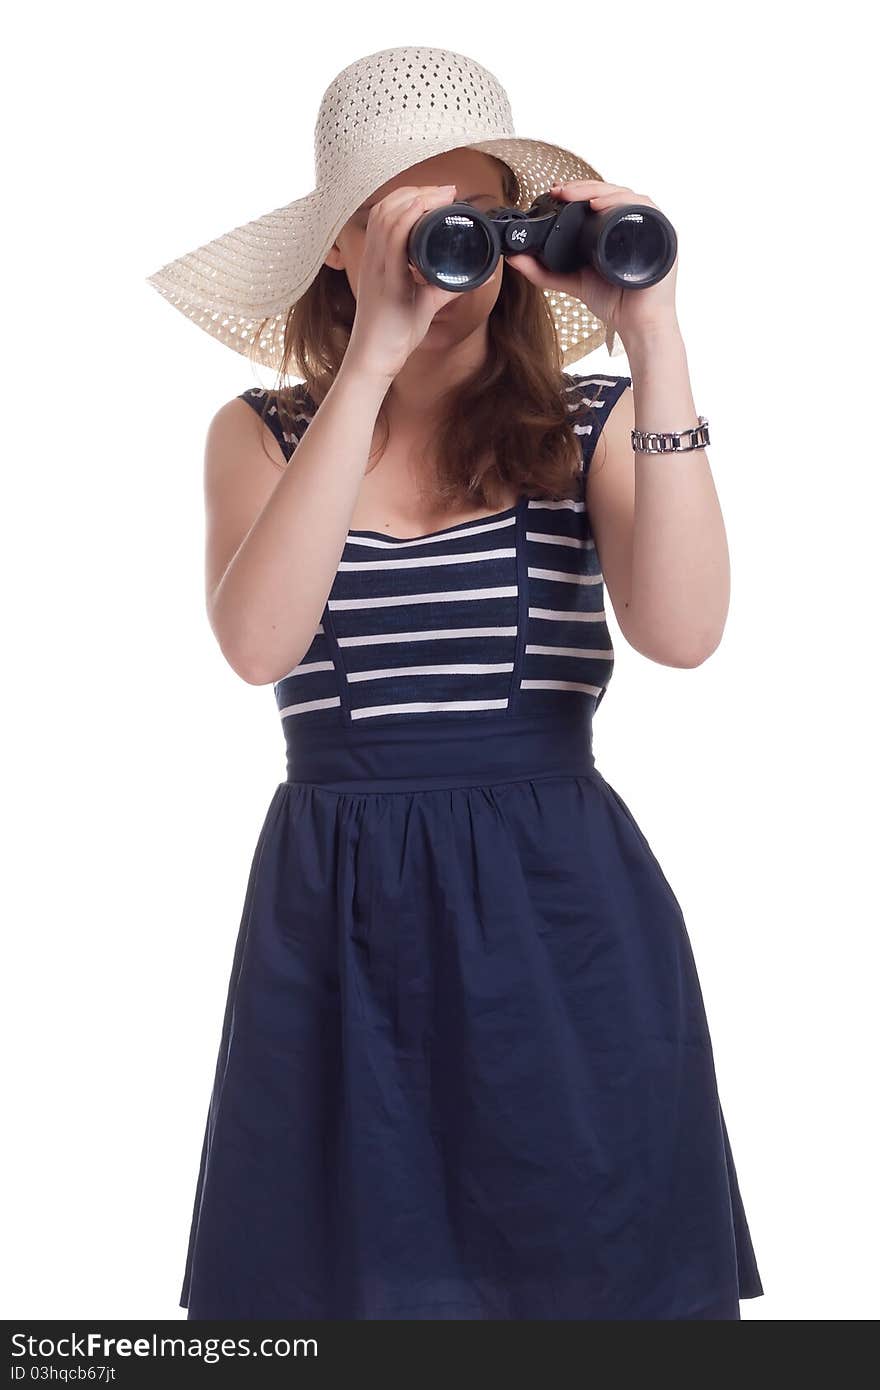 A girl in a big straw hat looking through binoculars on a white background